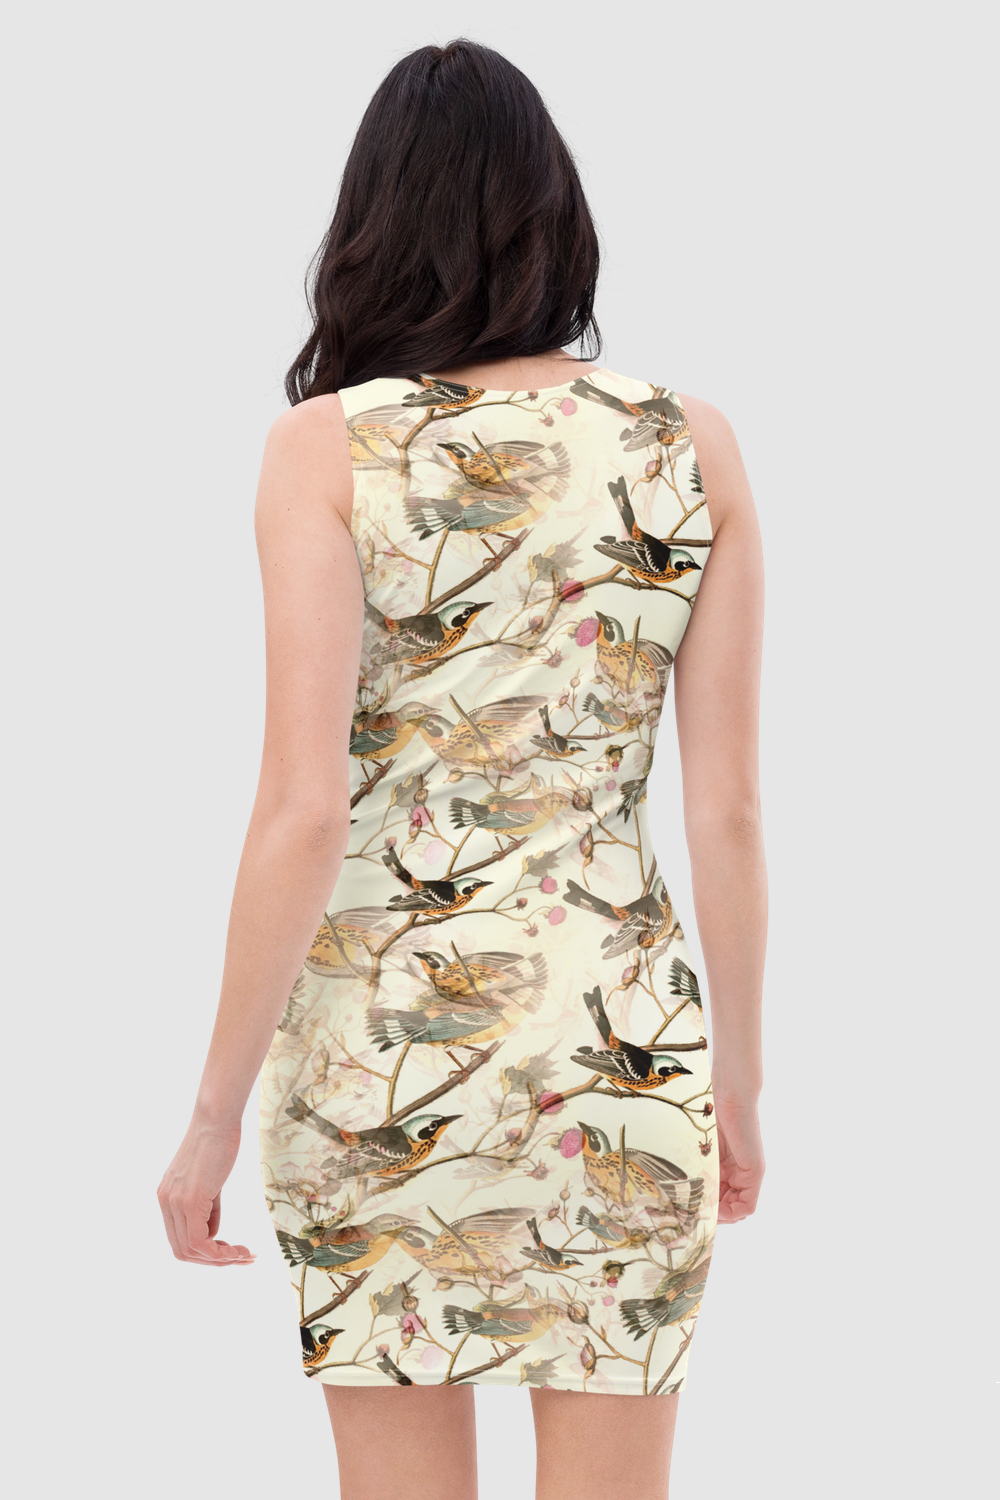 Vintage Floral Perched Birds Pattern Women's Sleeveless Fitted Sublimated Mini Dress